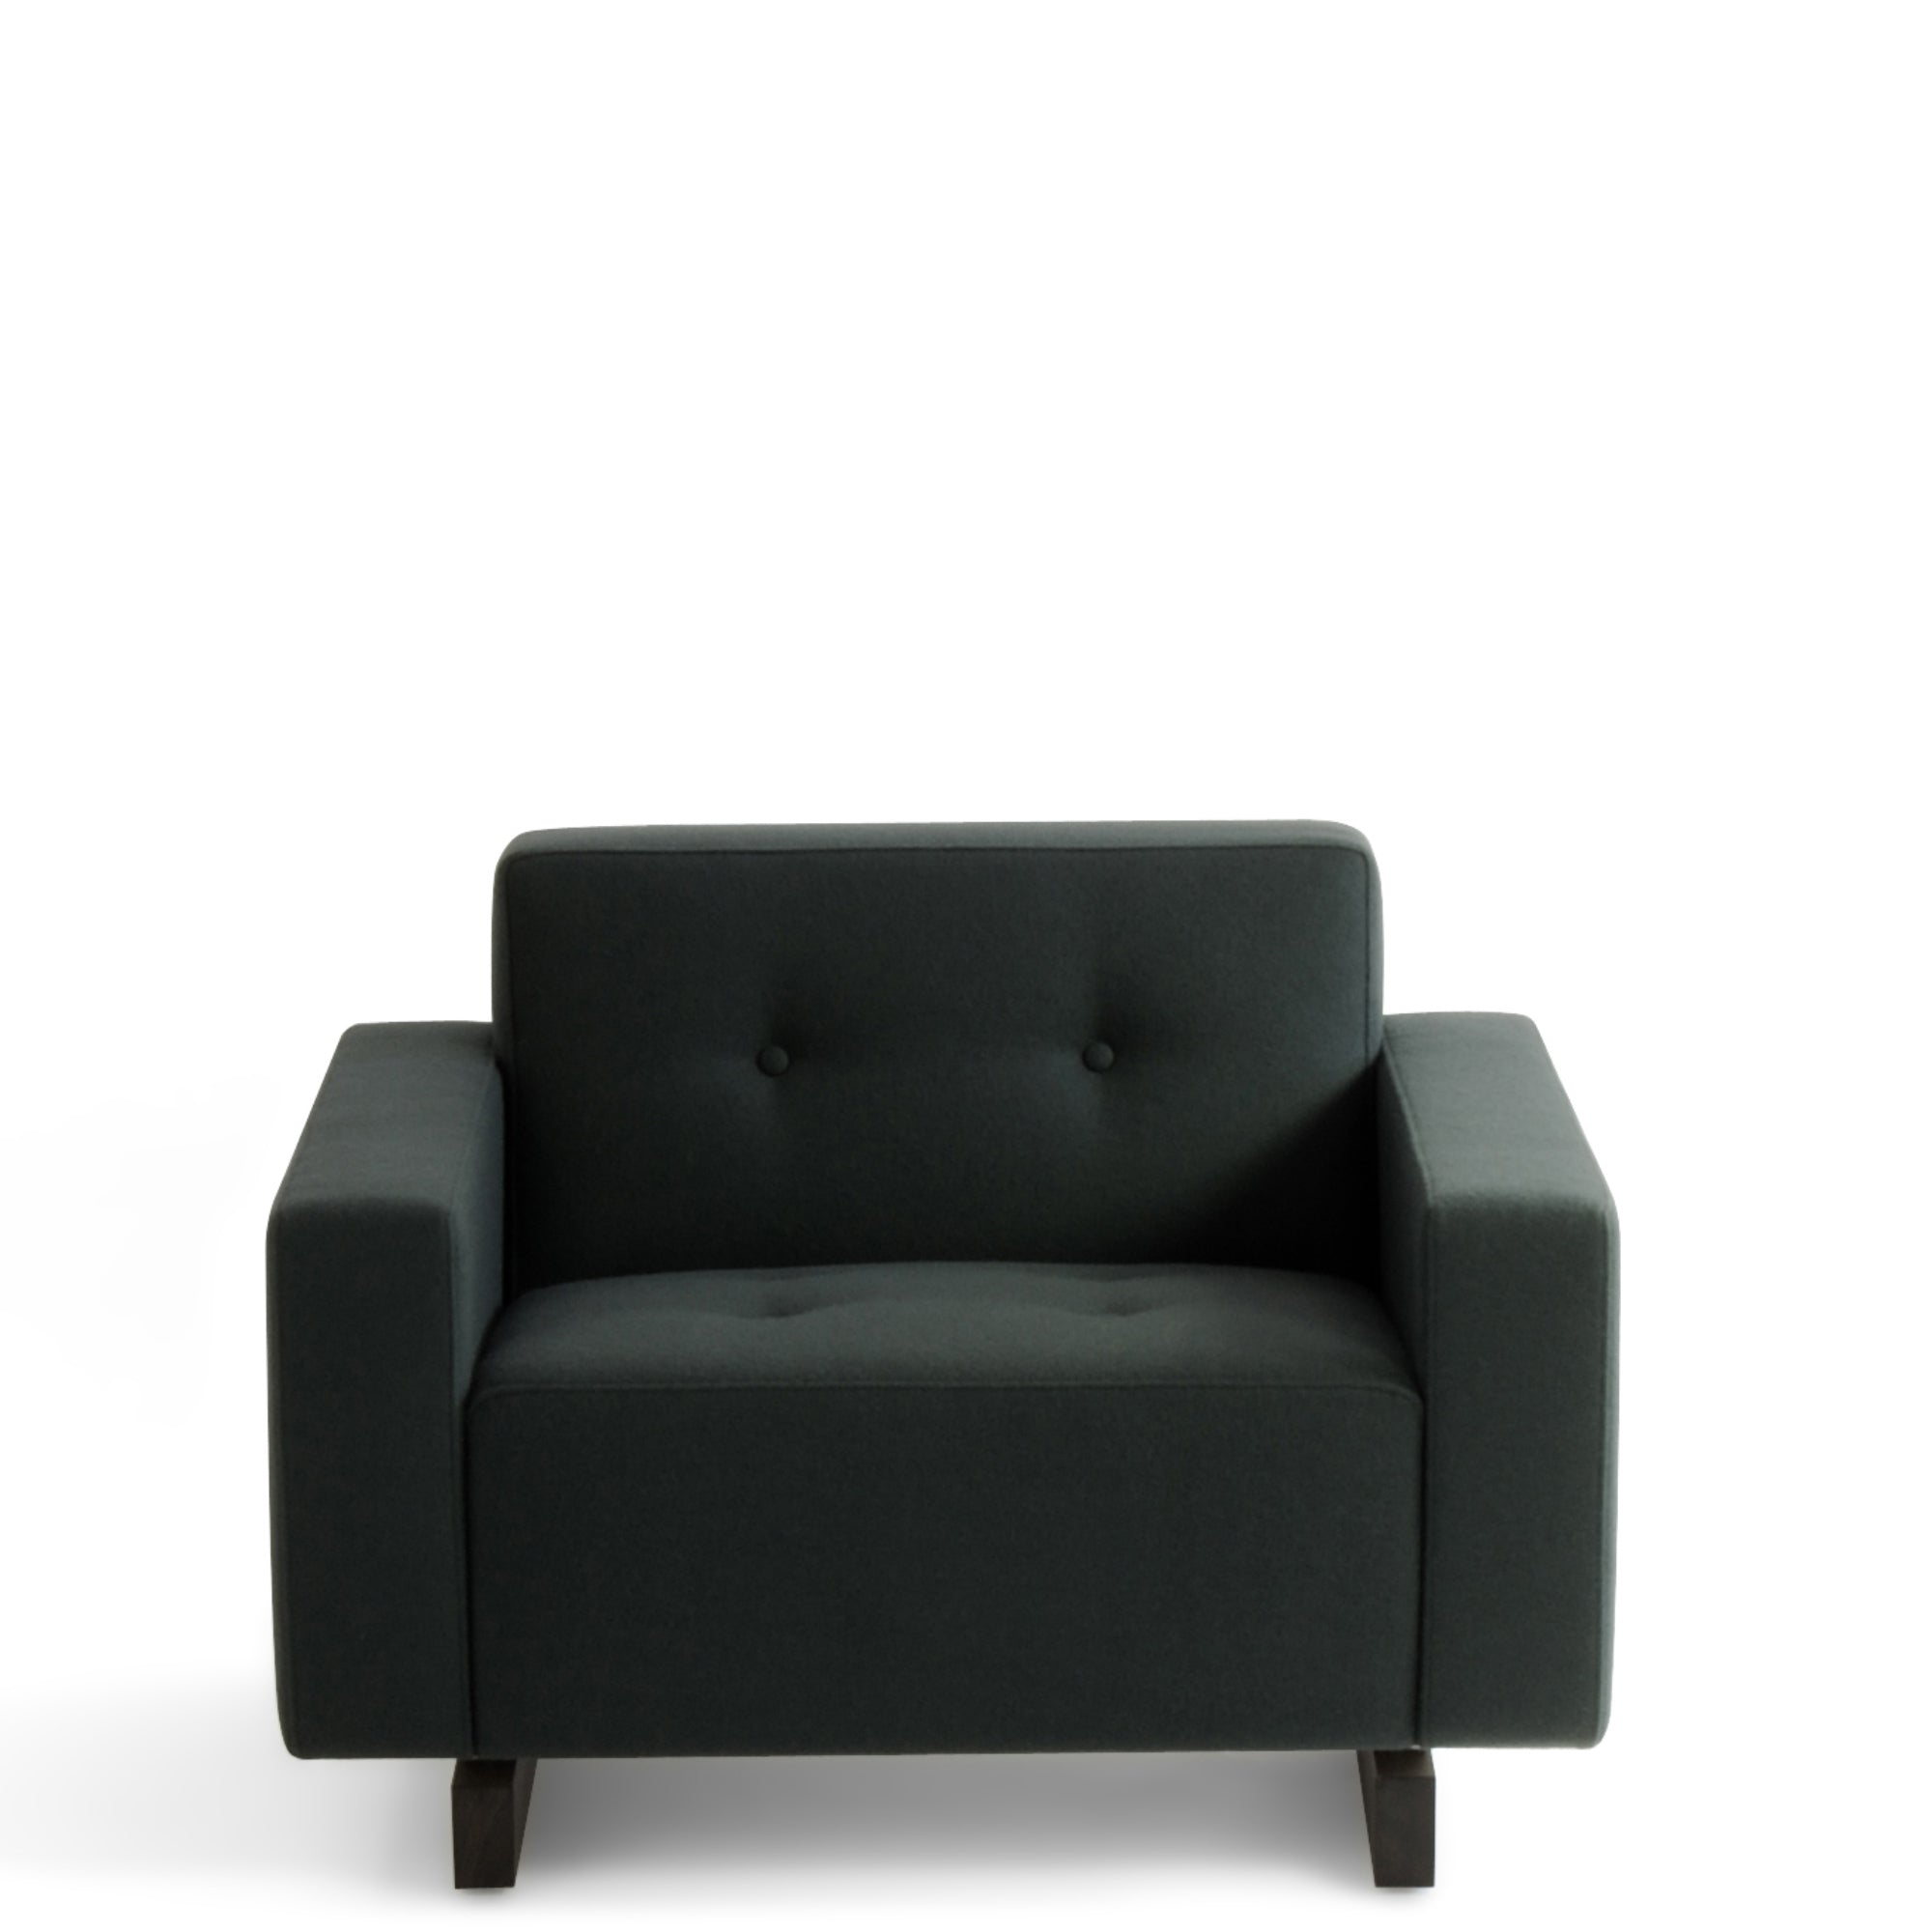 Hitch Mylius Office HM46 Abbey Armchair Seating